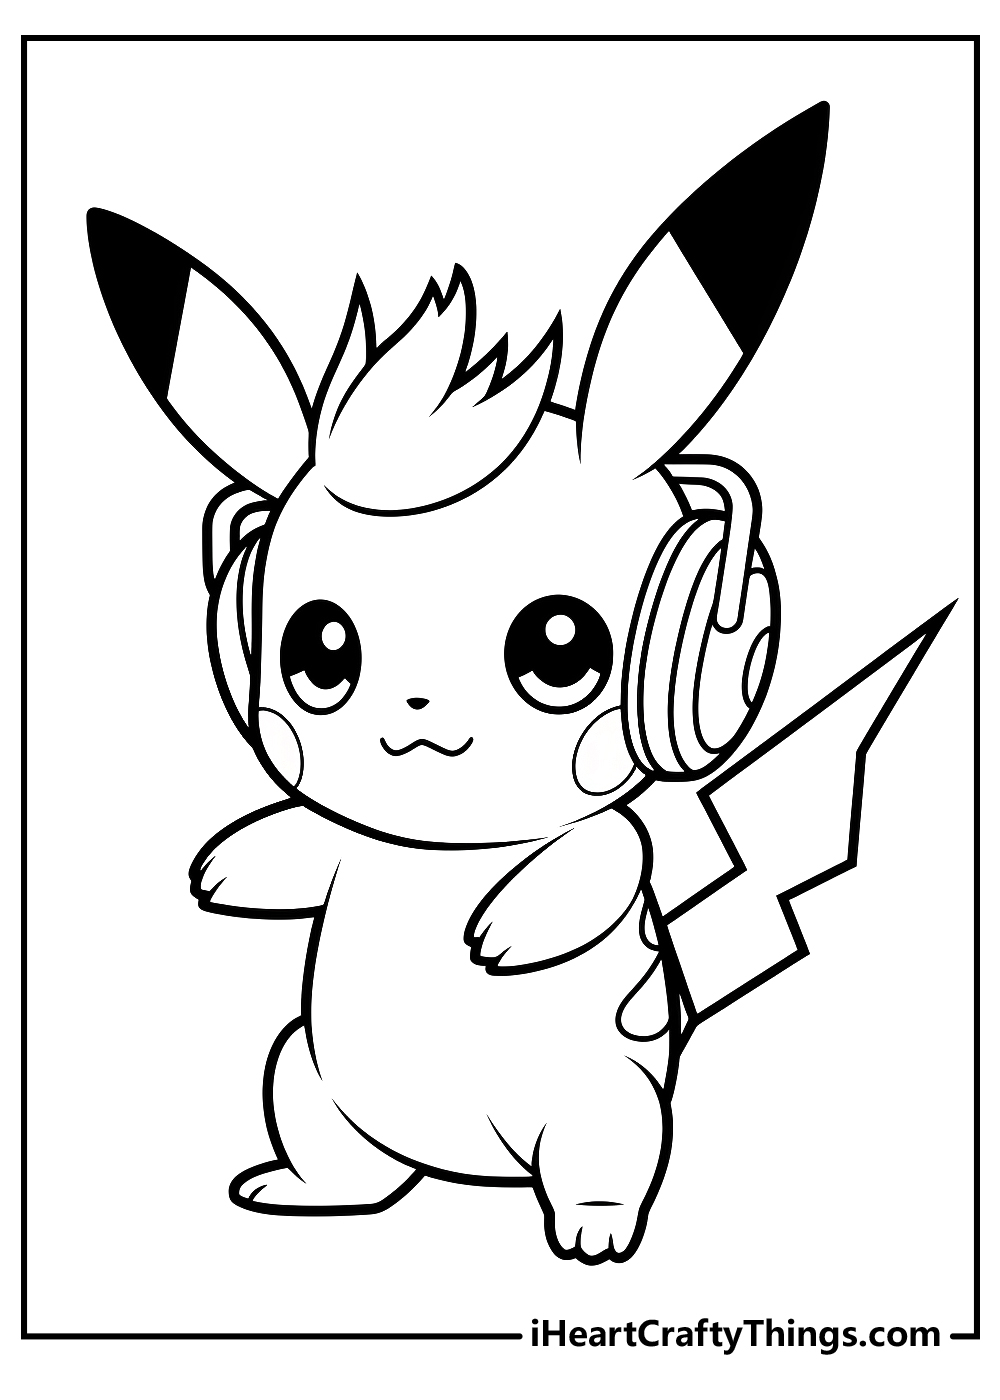 Pikachu Face Coloring Pages – Through the thousands of pictures online  concerning pikachu face…